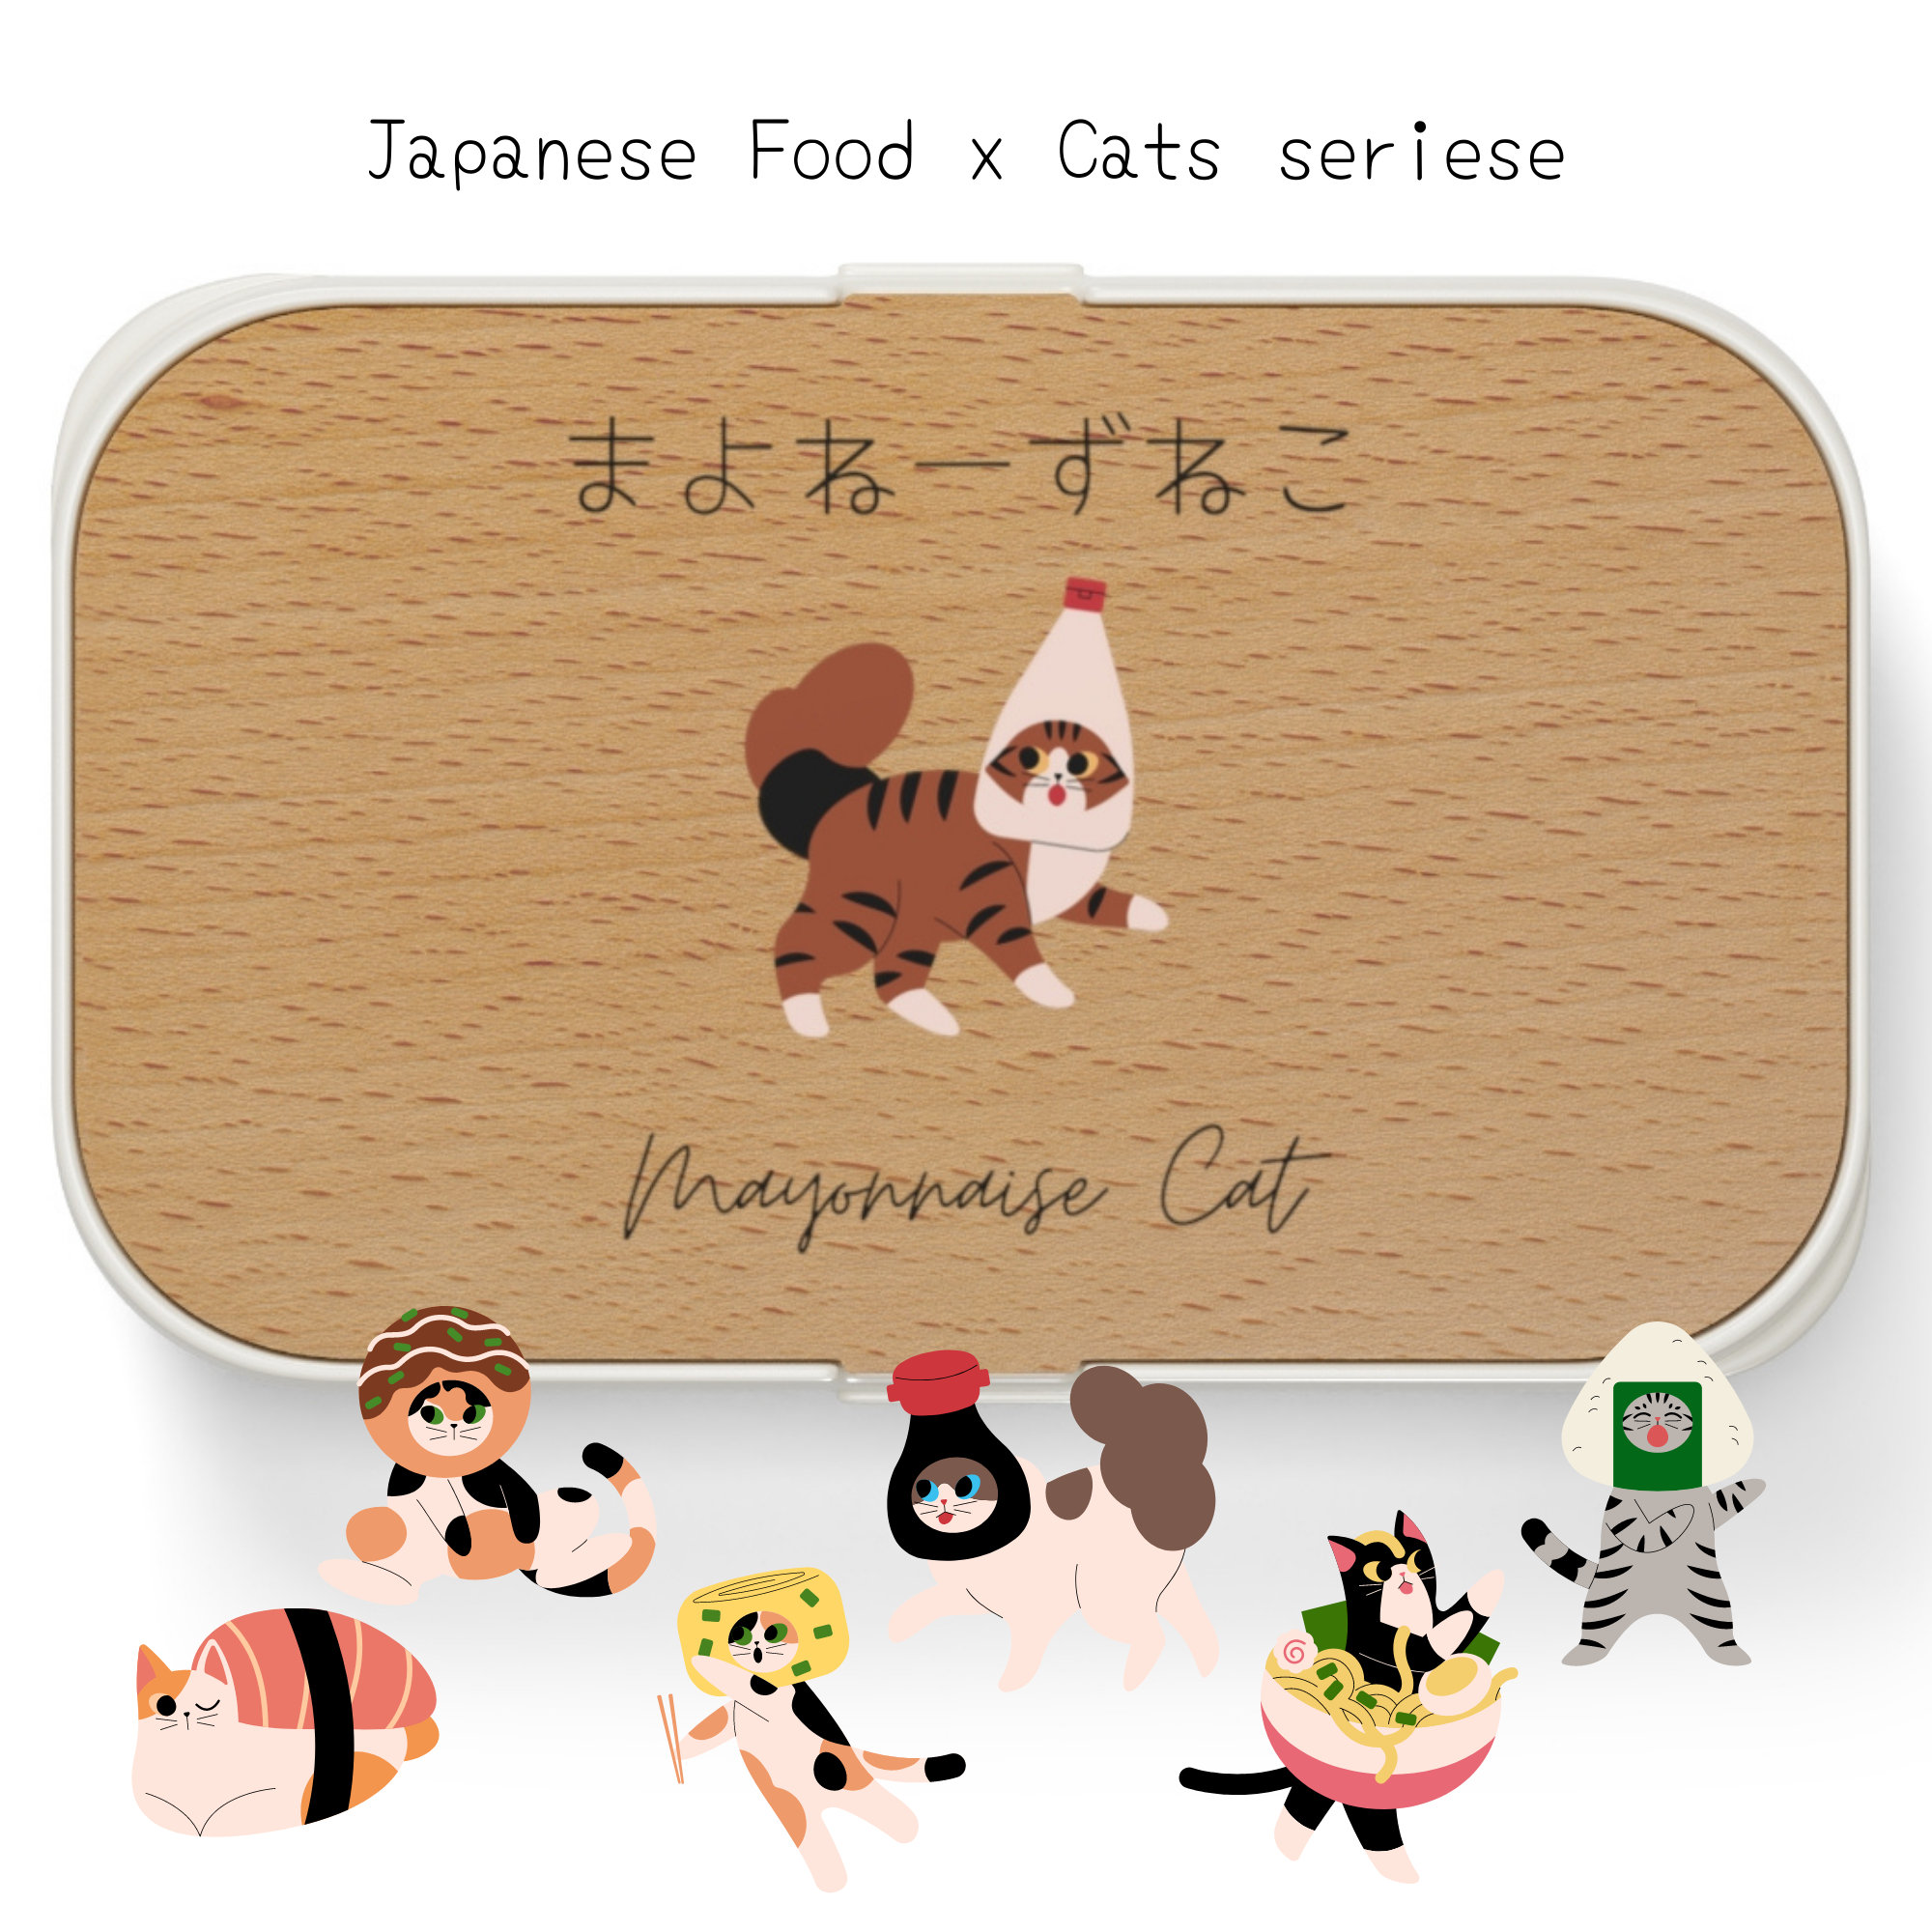 DanceeMangoos Kawaii Bento Box Cute Cartoon Lunch Box Leakproof Lunch  Container with Divided Compartments Japanese Aesthetics Accessories for  Schools